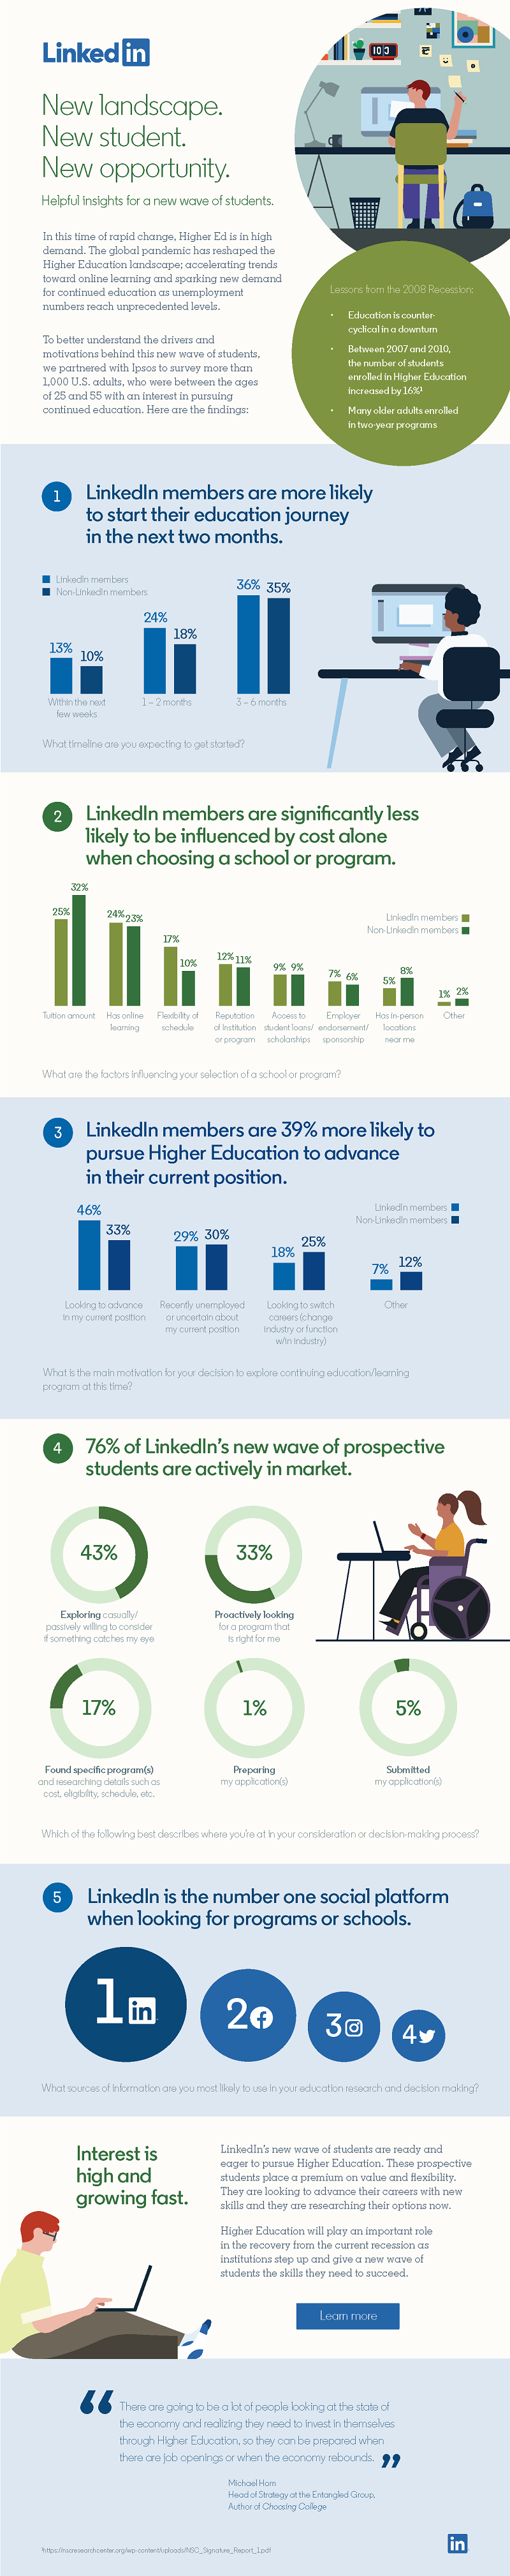 linkedin shares new data on the rising interest in higher education among us users infographic